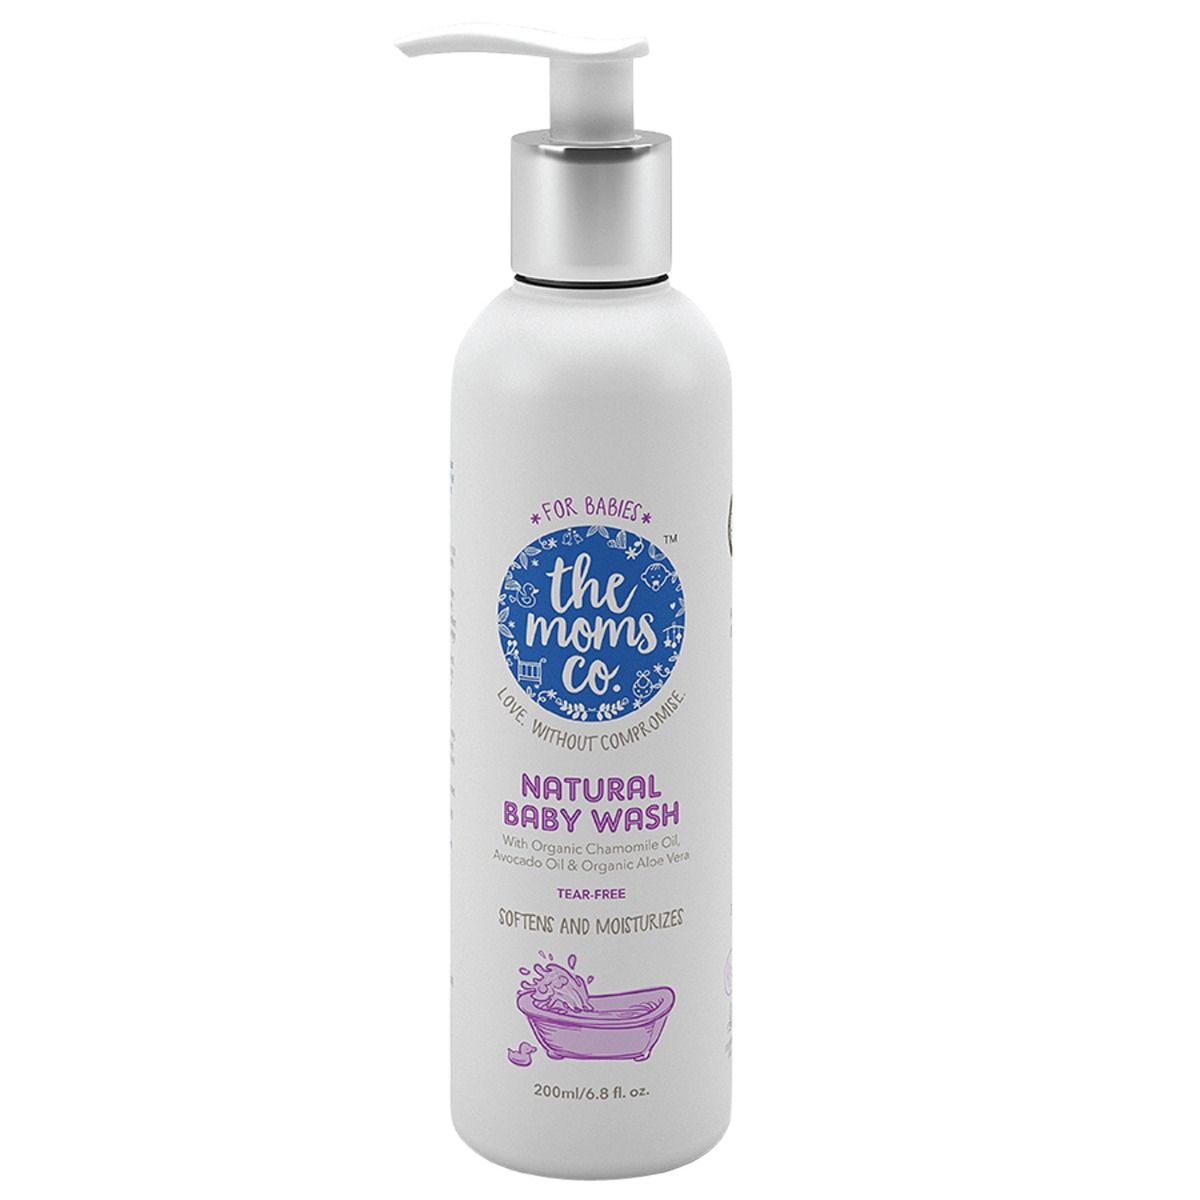 The Moms Co.Natural Baby Wash, 200 ml, Pack of 1 